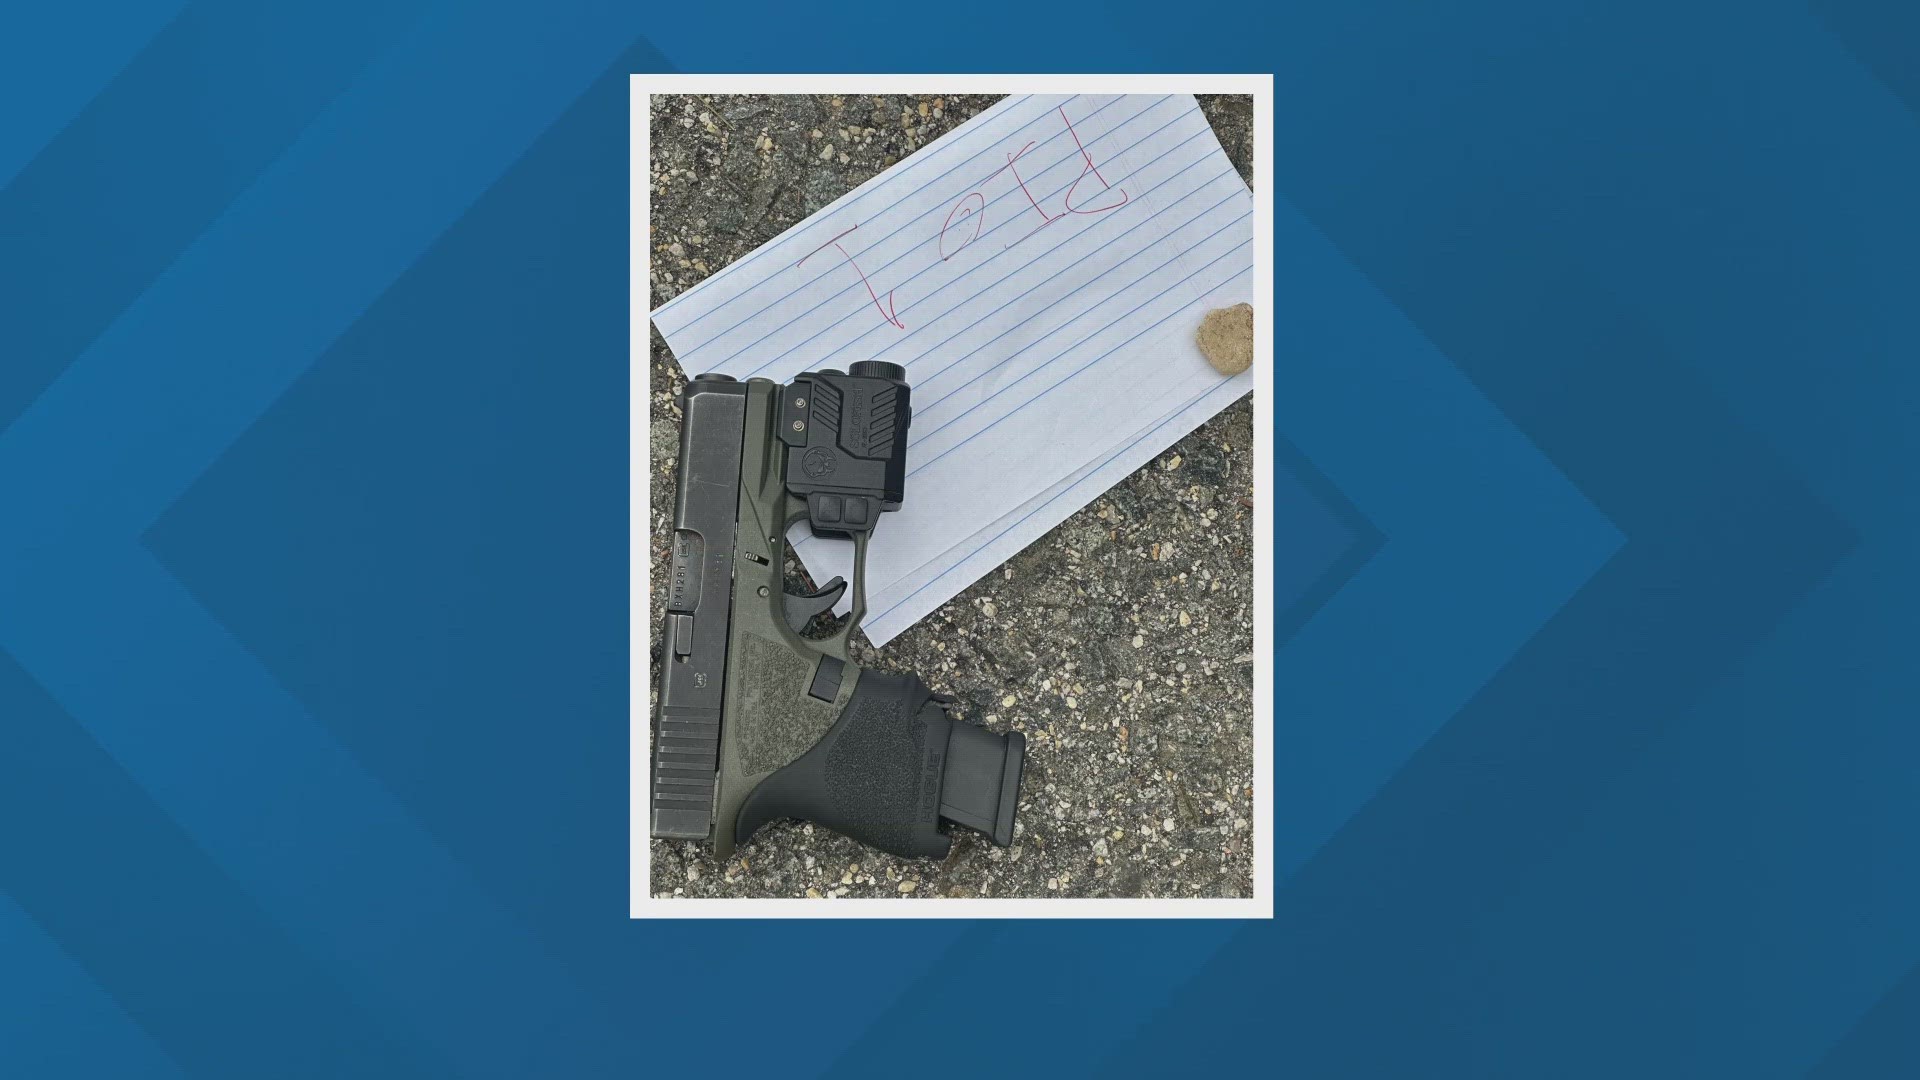 Two guns were recovered in the parking lot. A third suspect who remained seated in the carjacked car fled the scene after ramming an unmarked patrol car, police say.